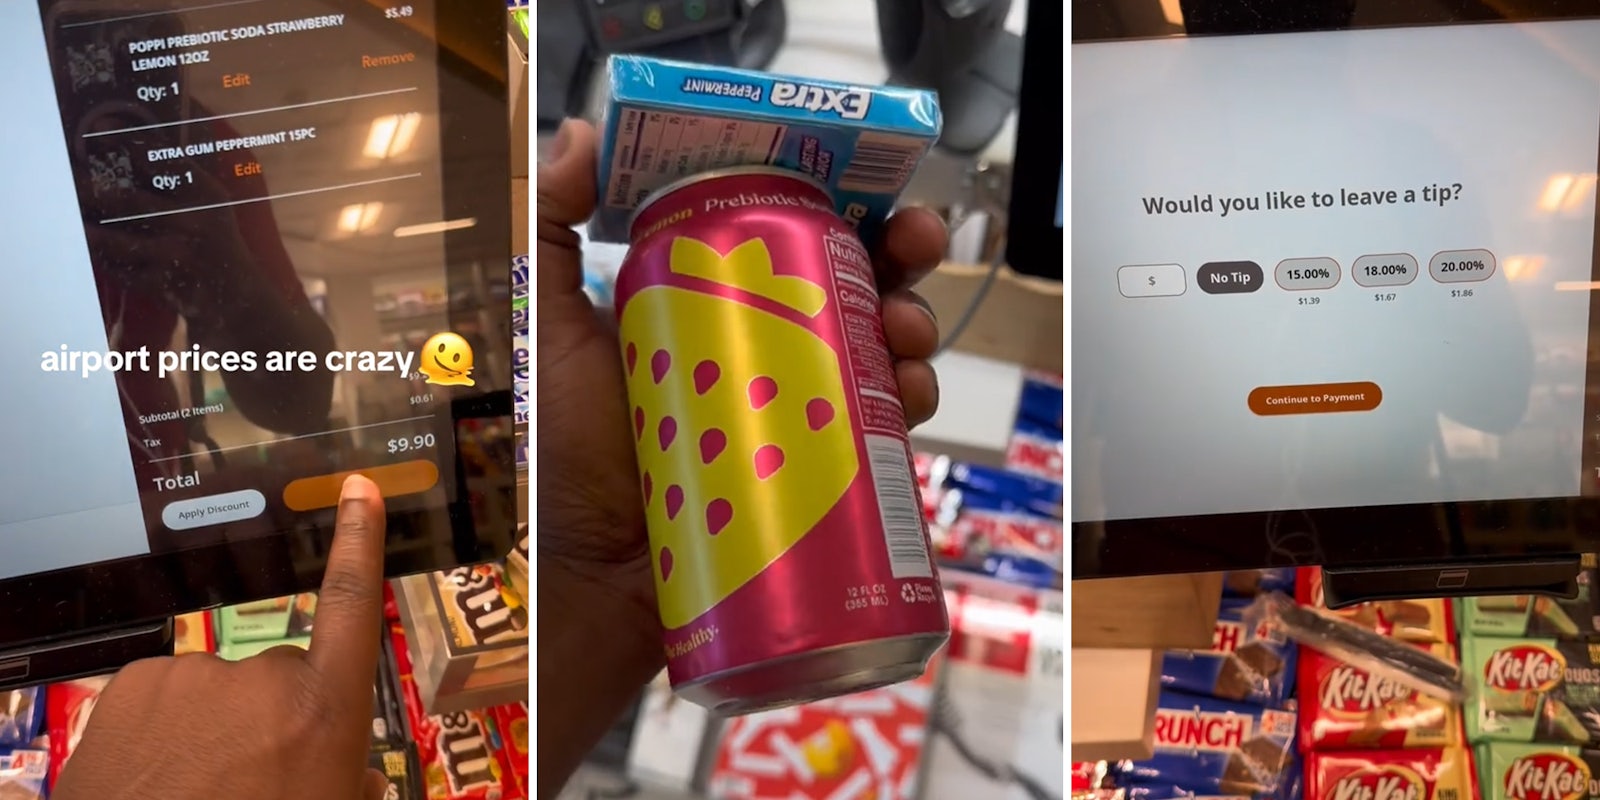 Customer uses self-service kiosk to buy $3 pack of gum. They’re then asked to tip